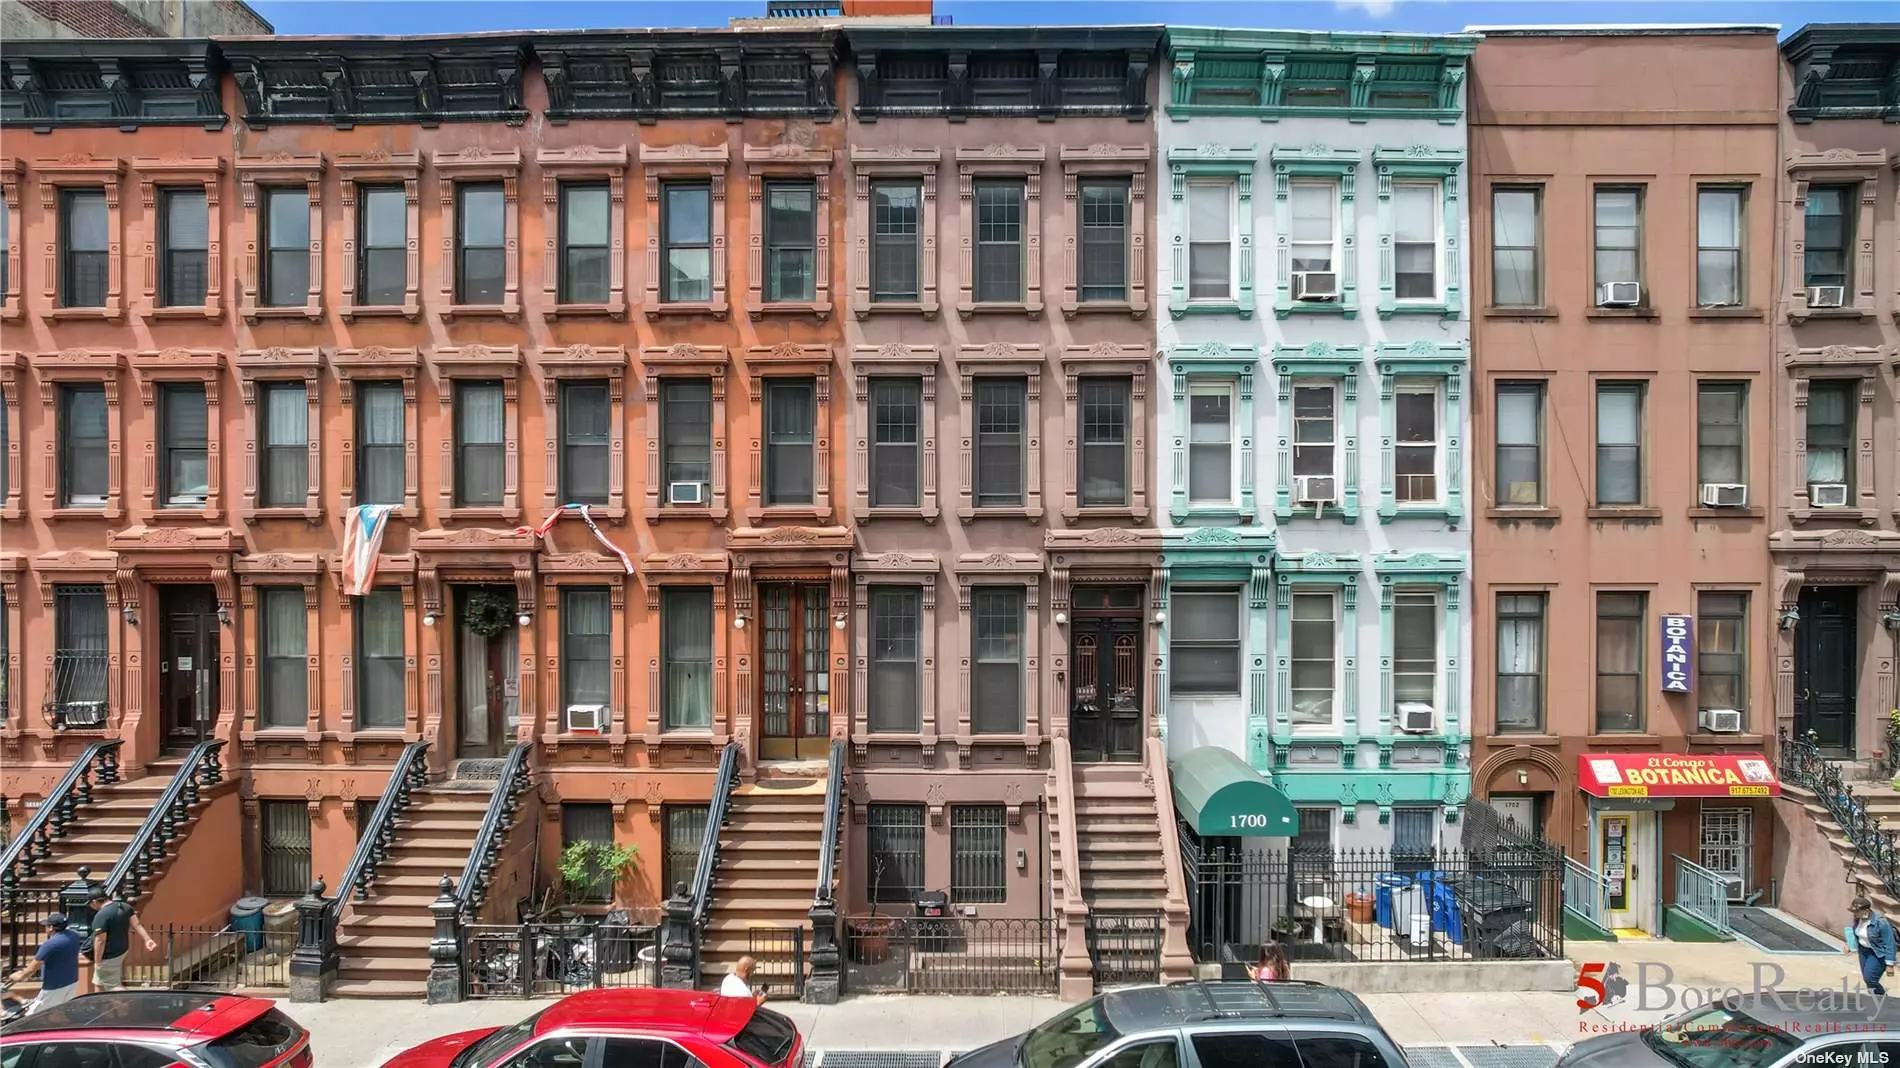 Brownstone? Lexington? Take a look at this historical 3, 920 SQFT Brownstone consists of six studios and a garden duplex apartment, mostly fully renovated! Located in one of the most prestigious areas of New York City. Building has so much to offer with a great potential income.